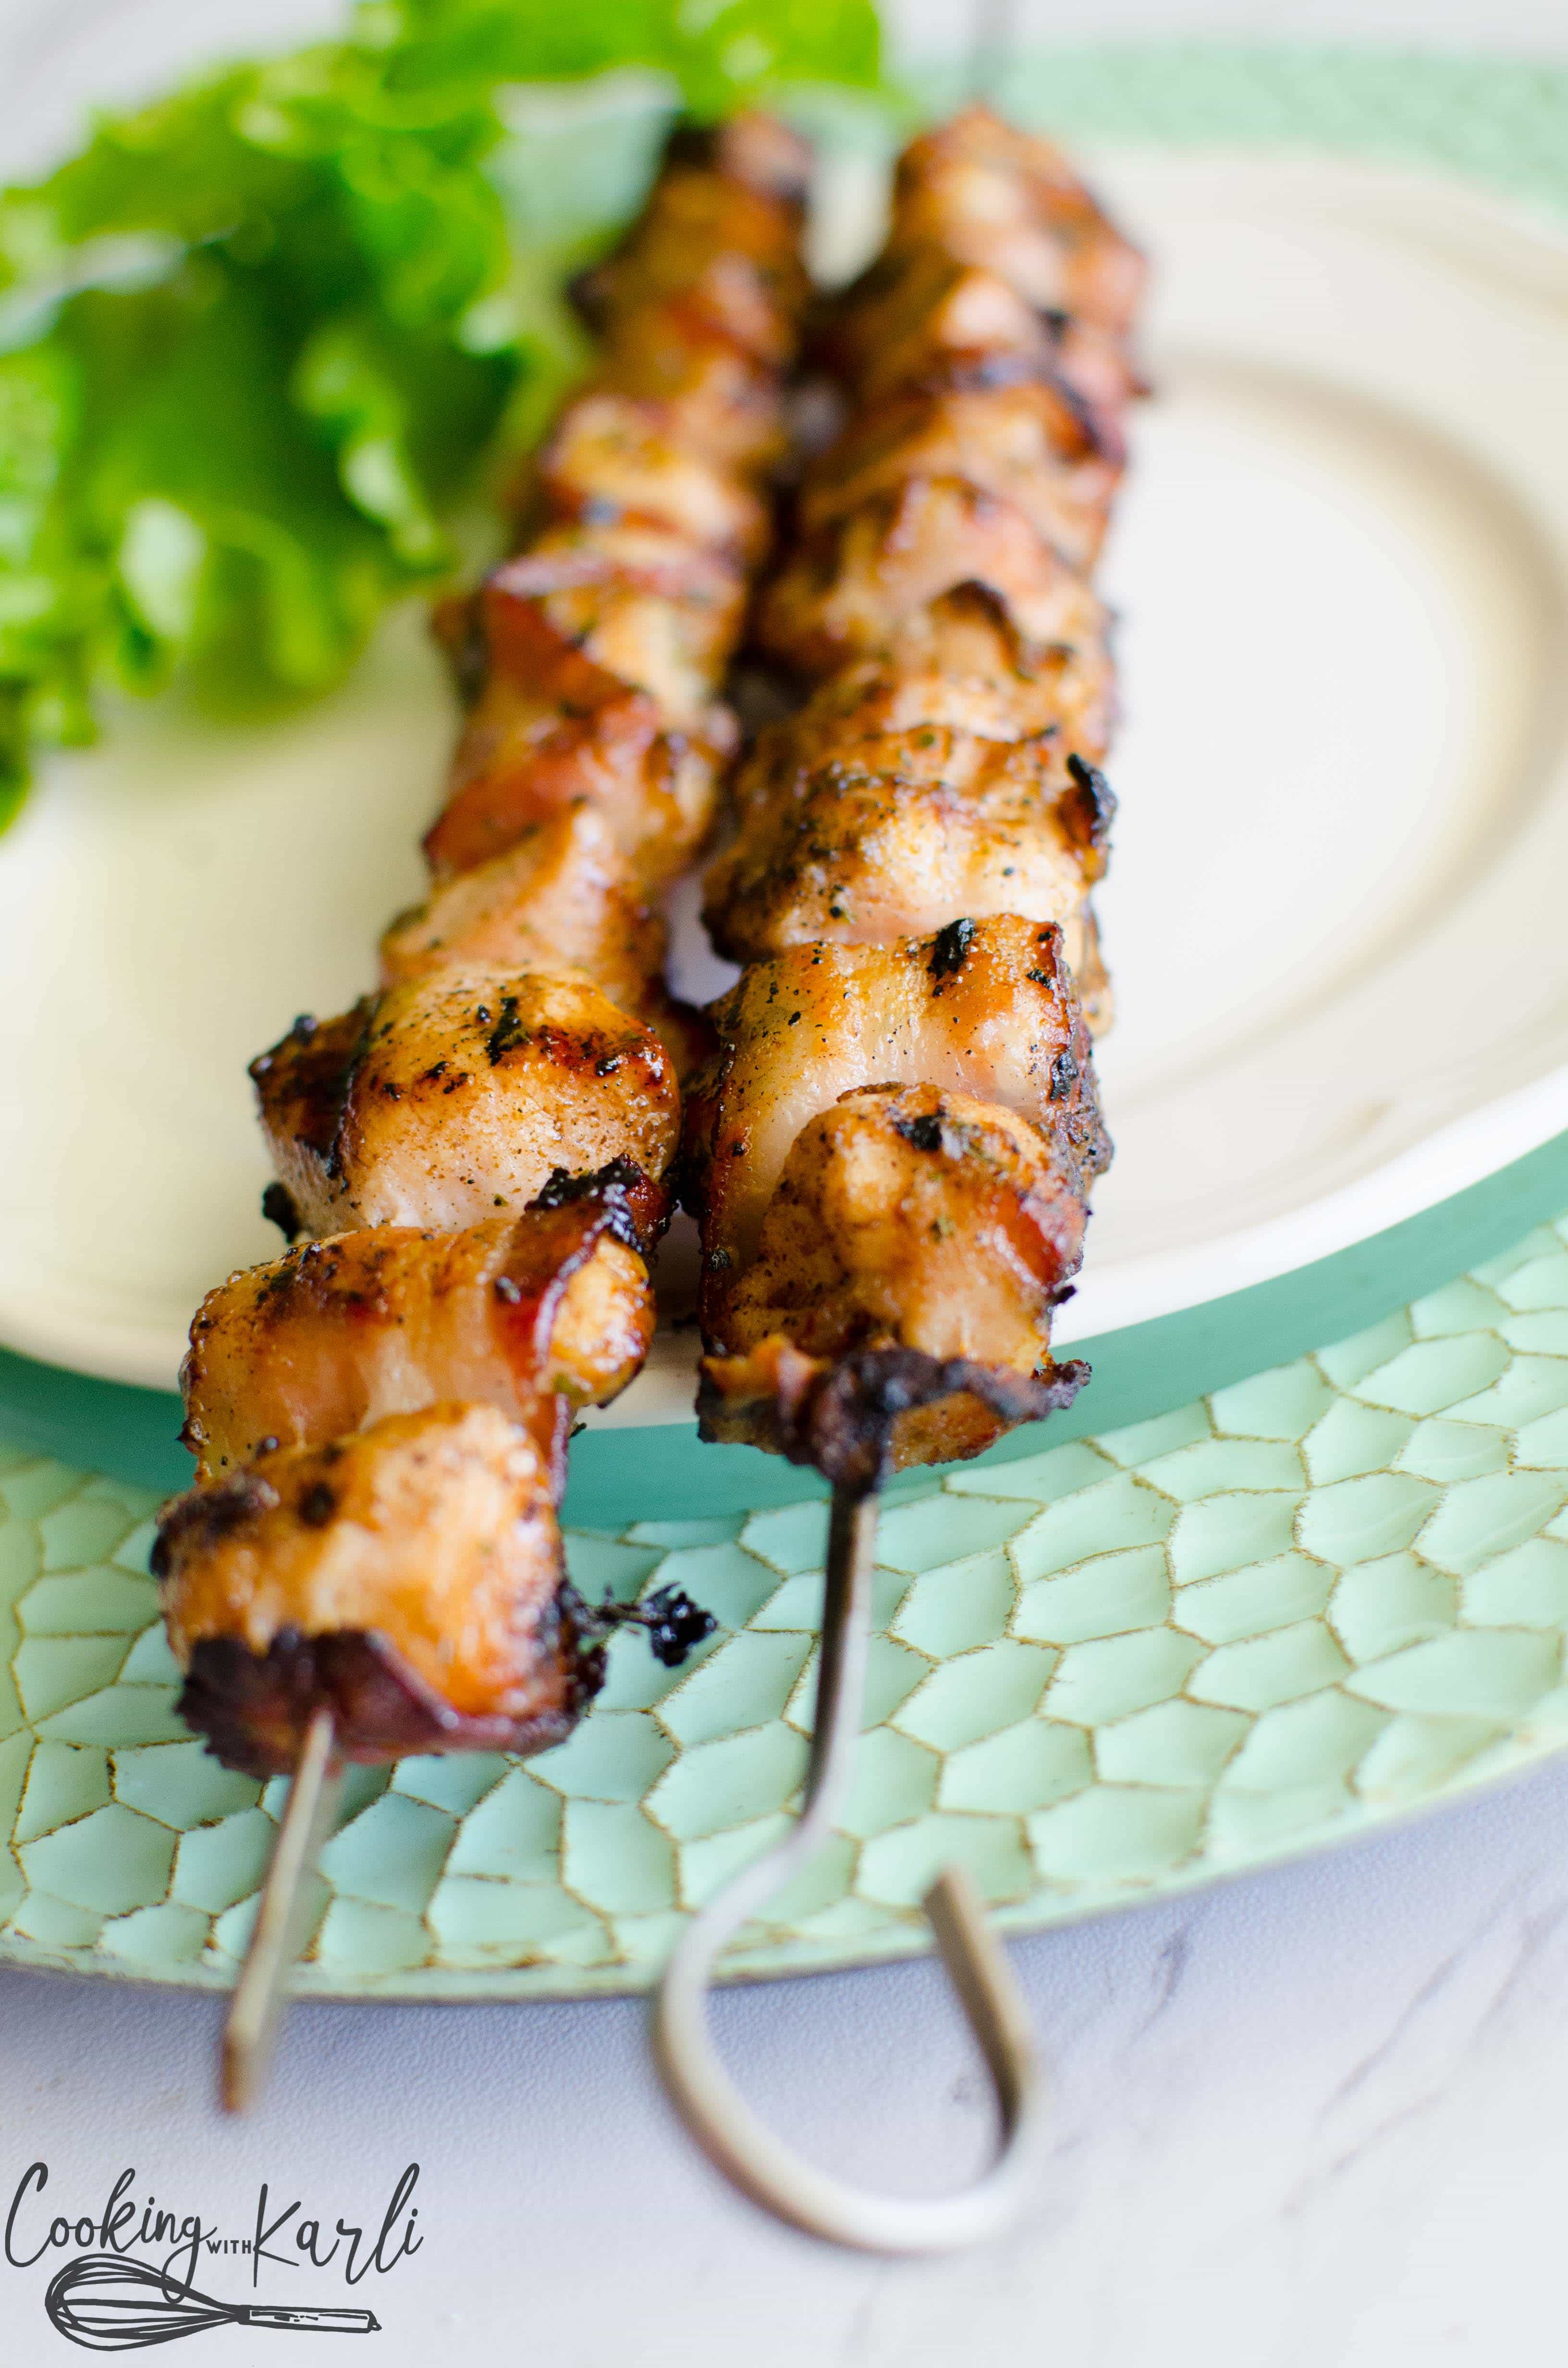 Grilling is everyone's favorite way to cook during the summer months. These chicken bacon ranch kabobs are perfect for Memorial Day weekend.